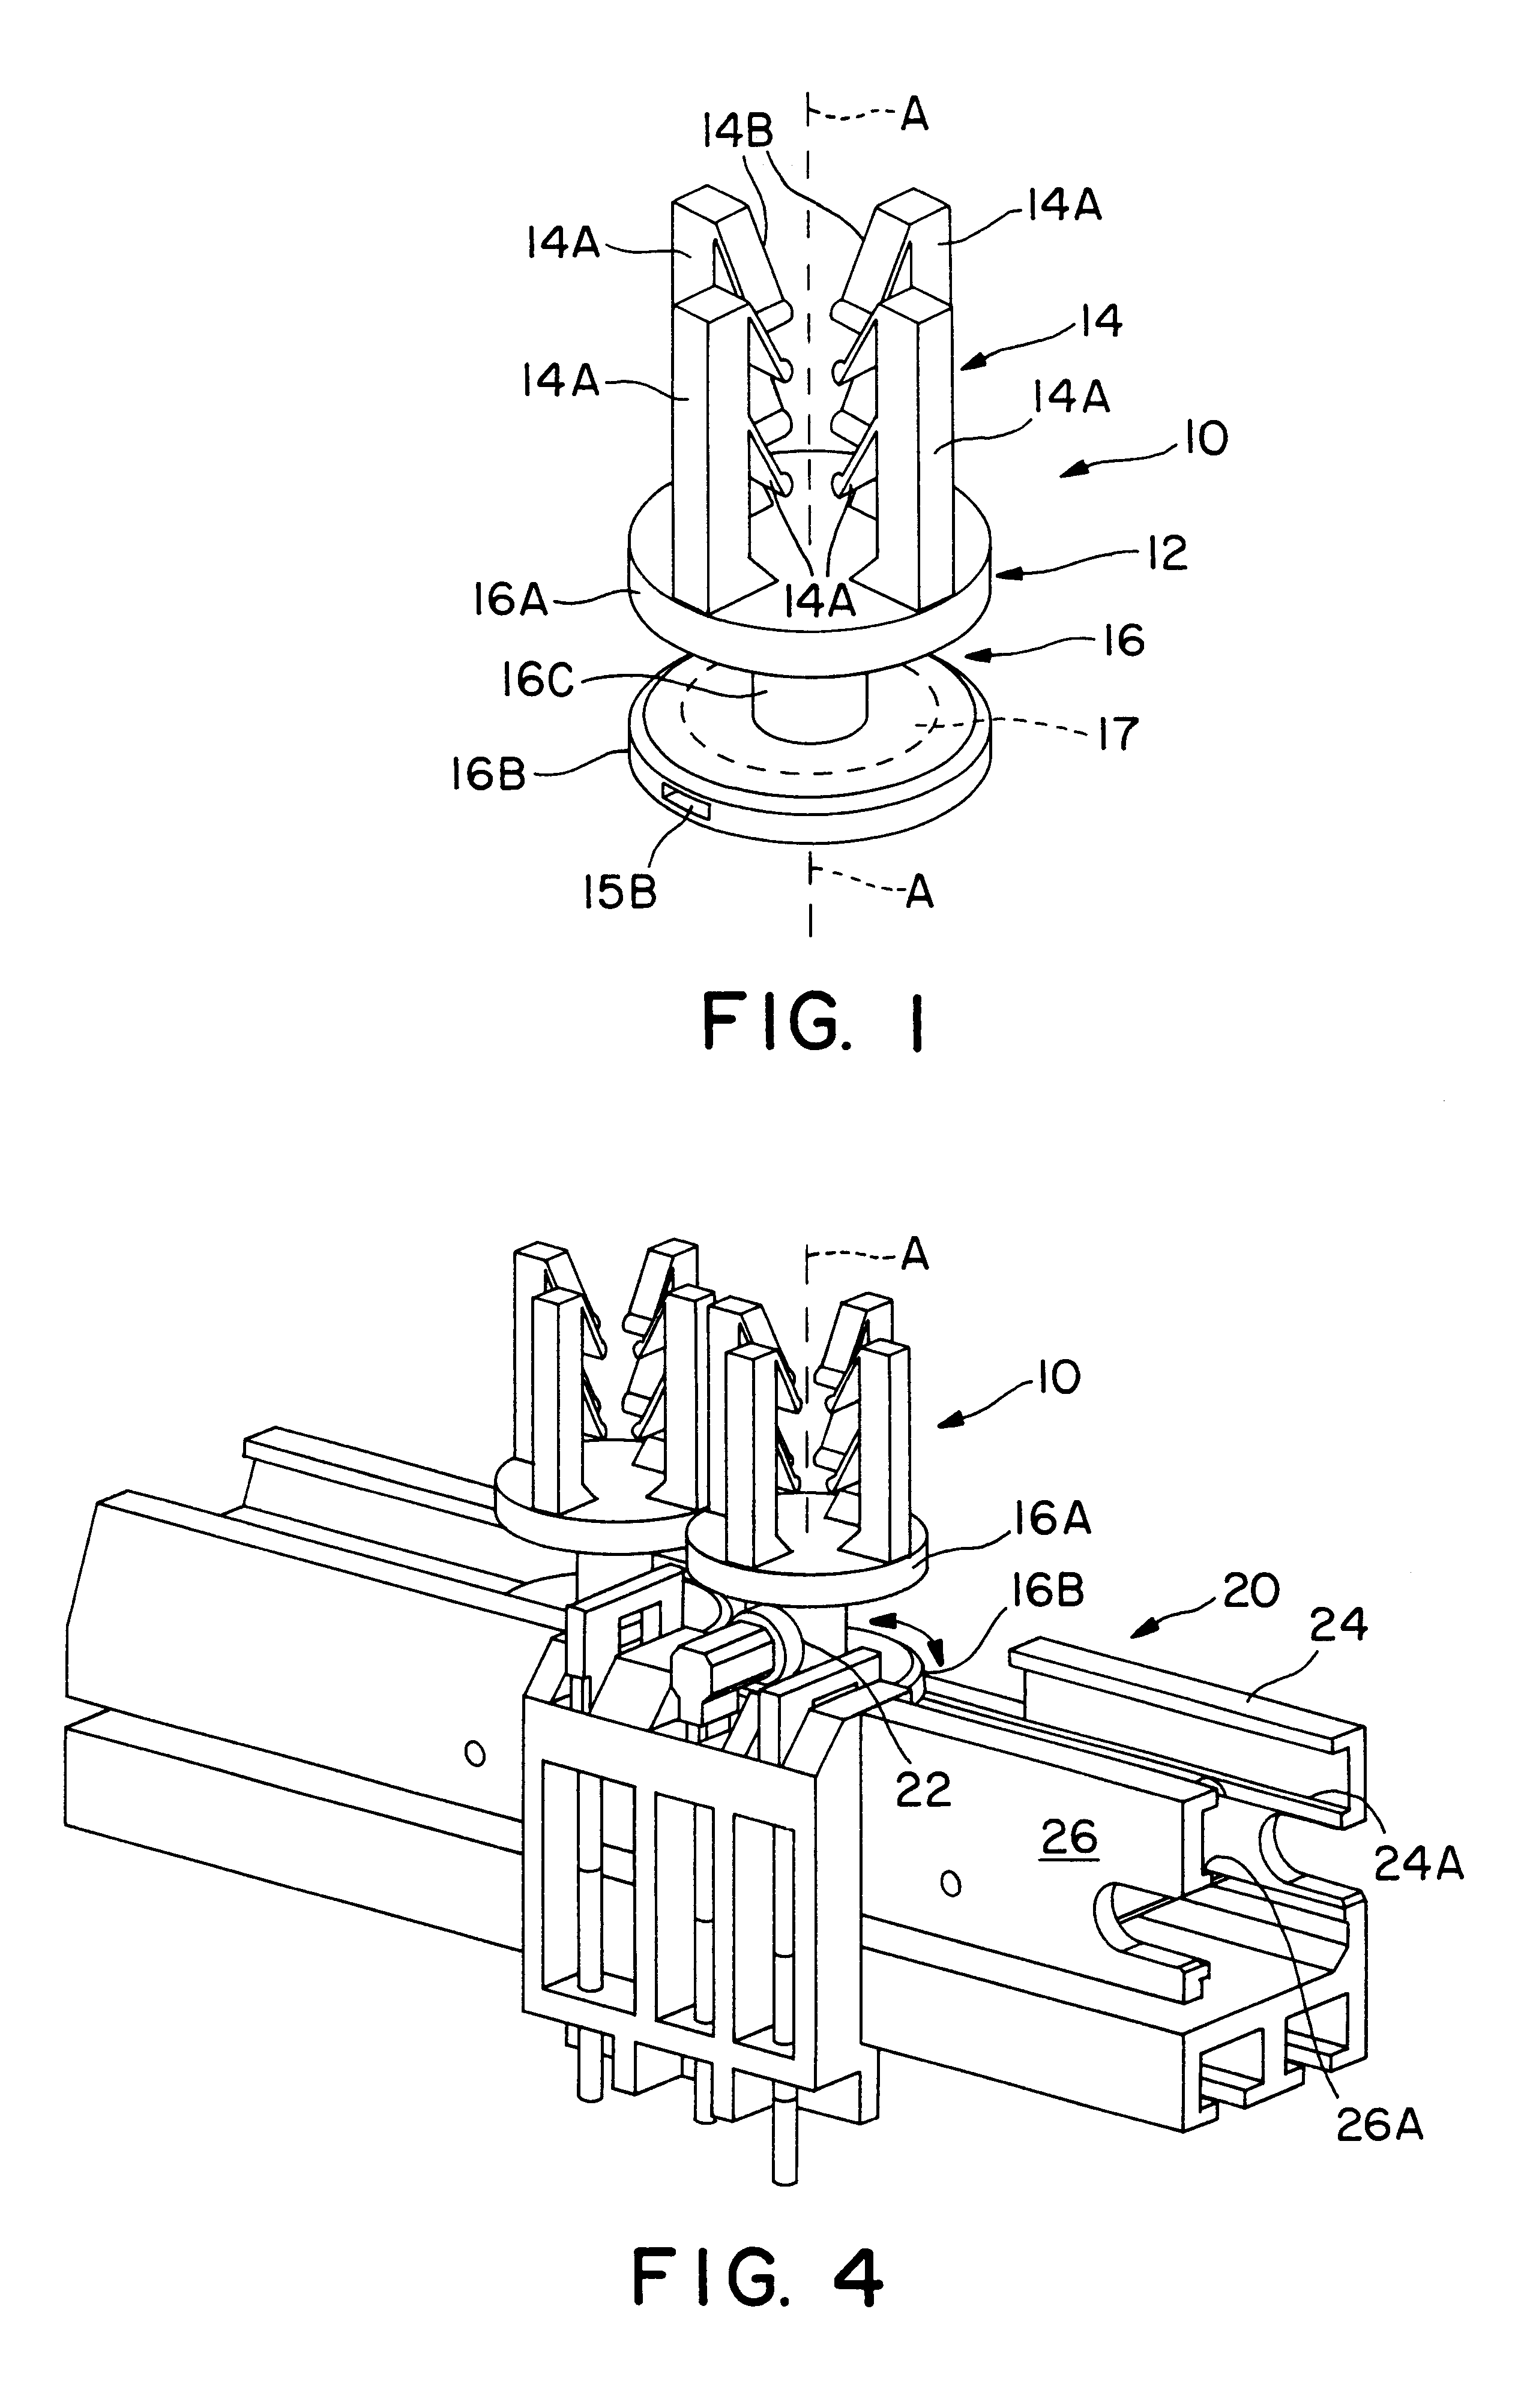 Specimen carrier for automated transport system and method and apparatus for identifying same